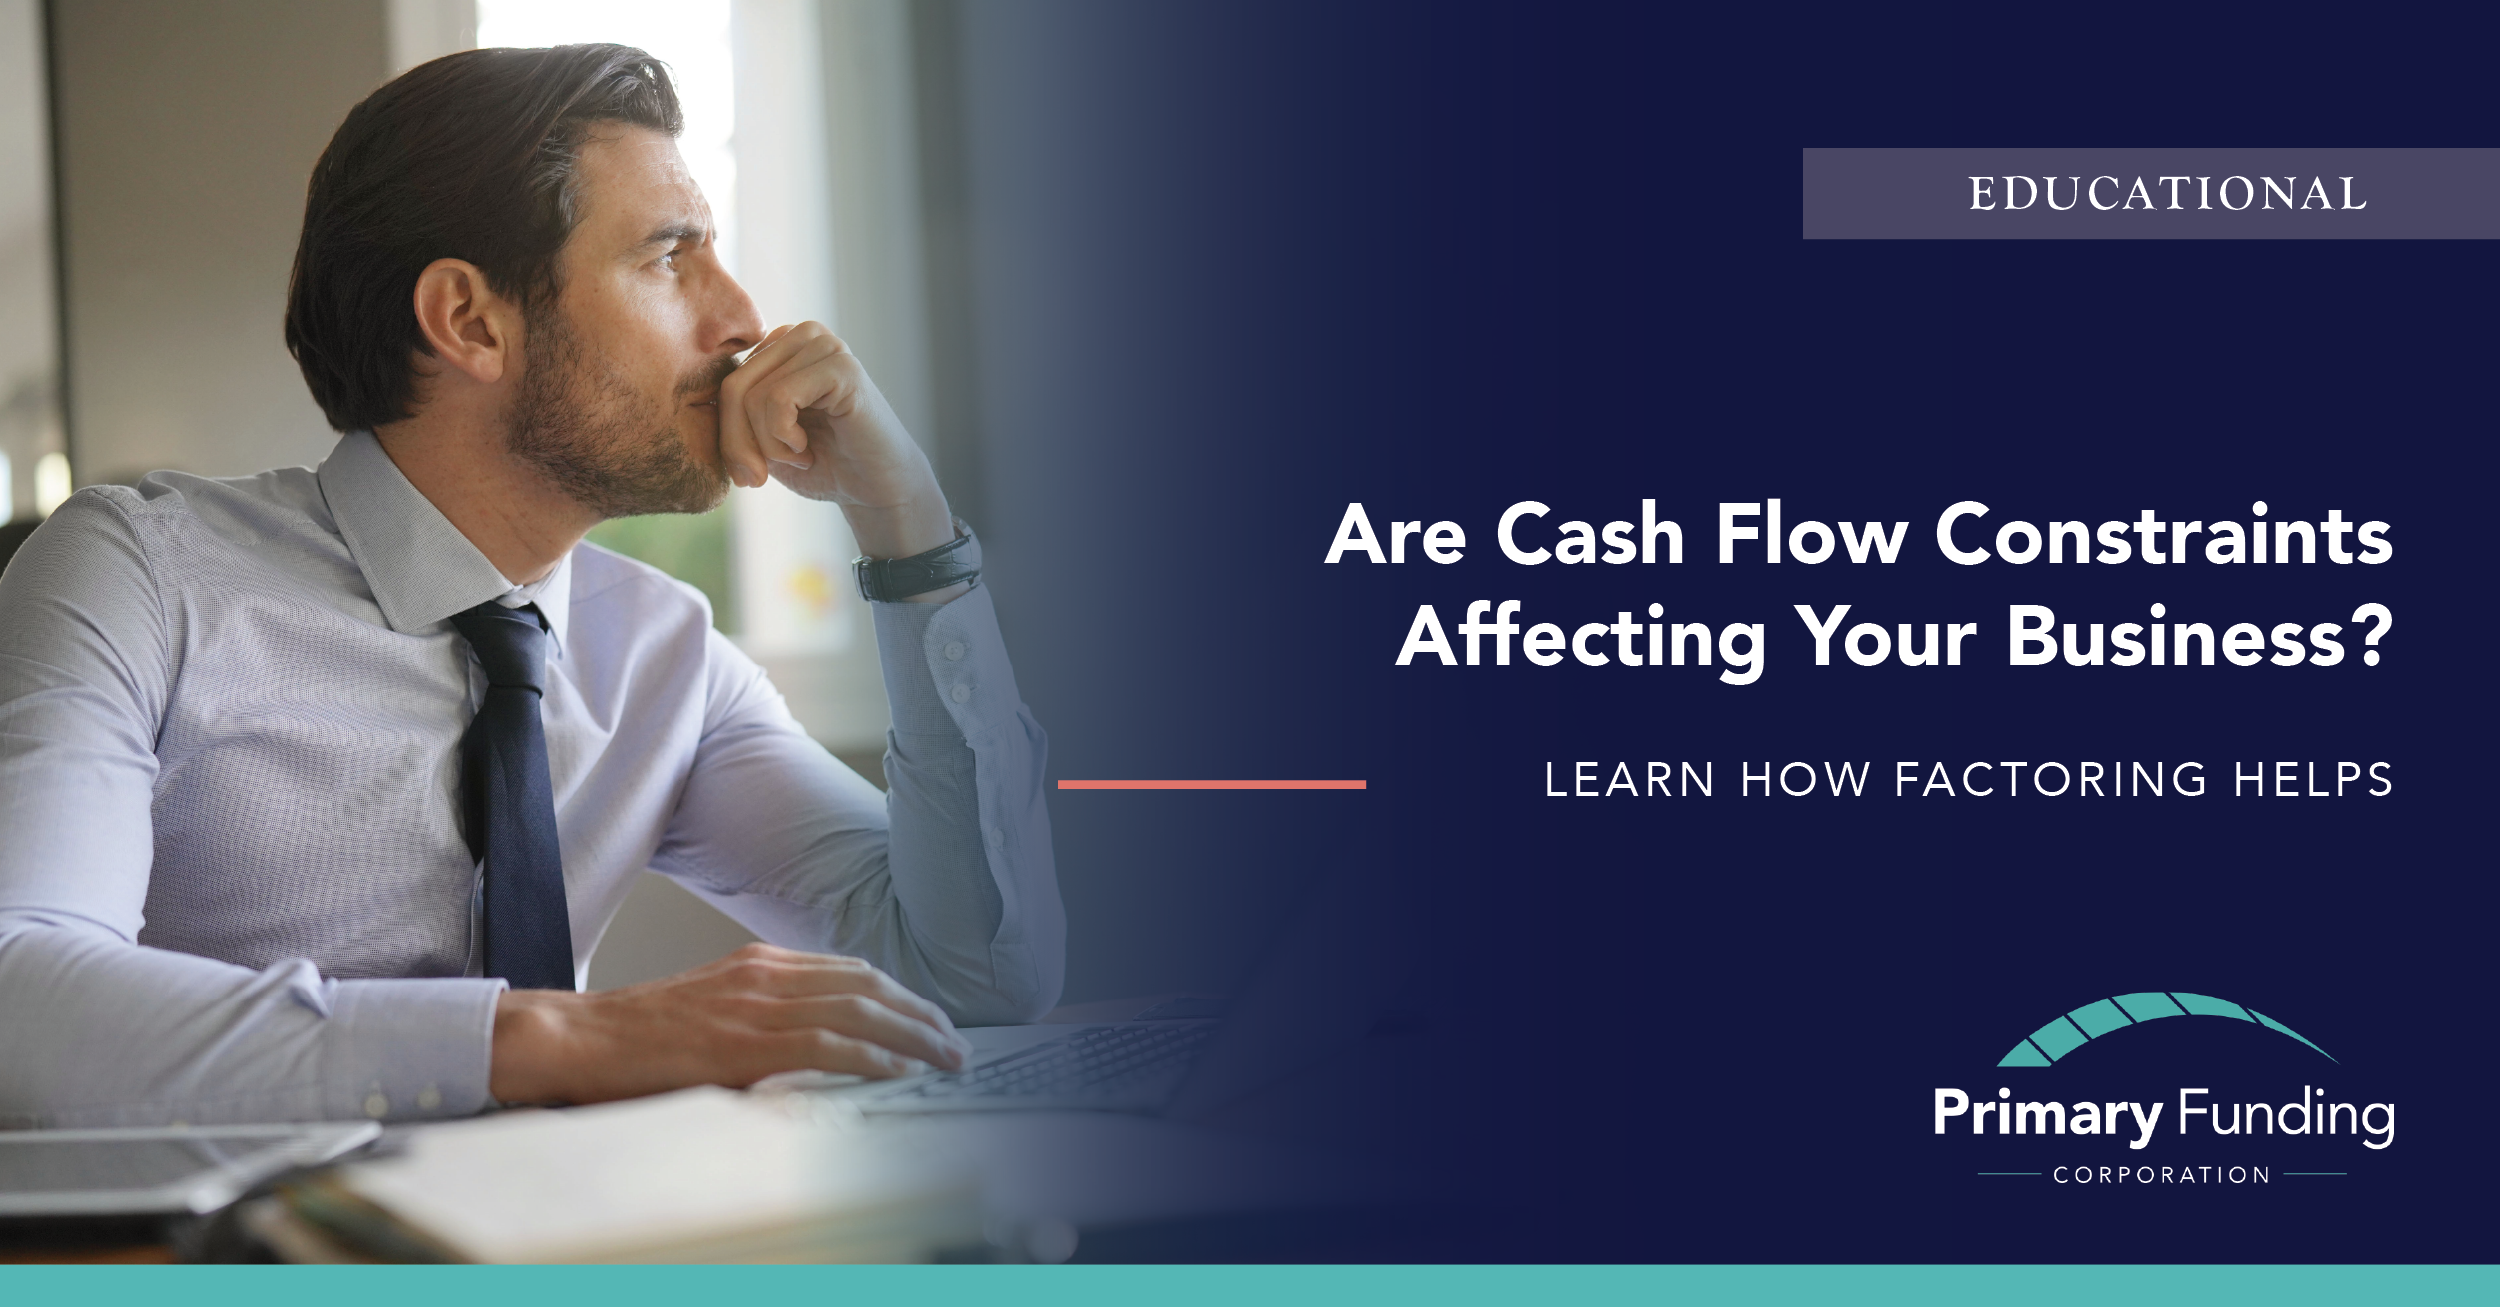 Are These Cashflow Constraints Impacting Your Business? How Factoring Helps post image